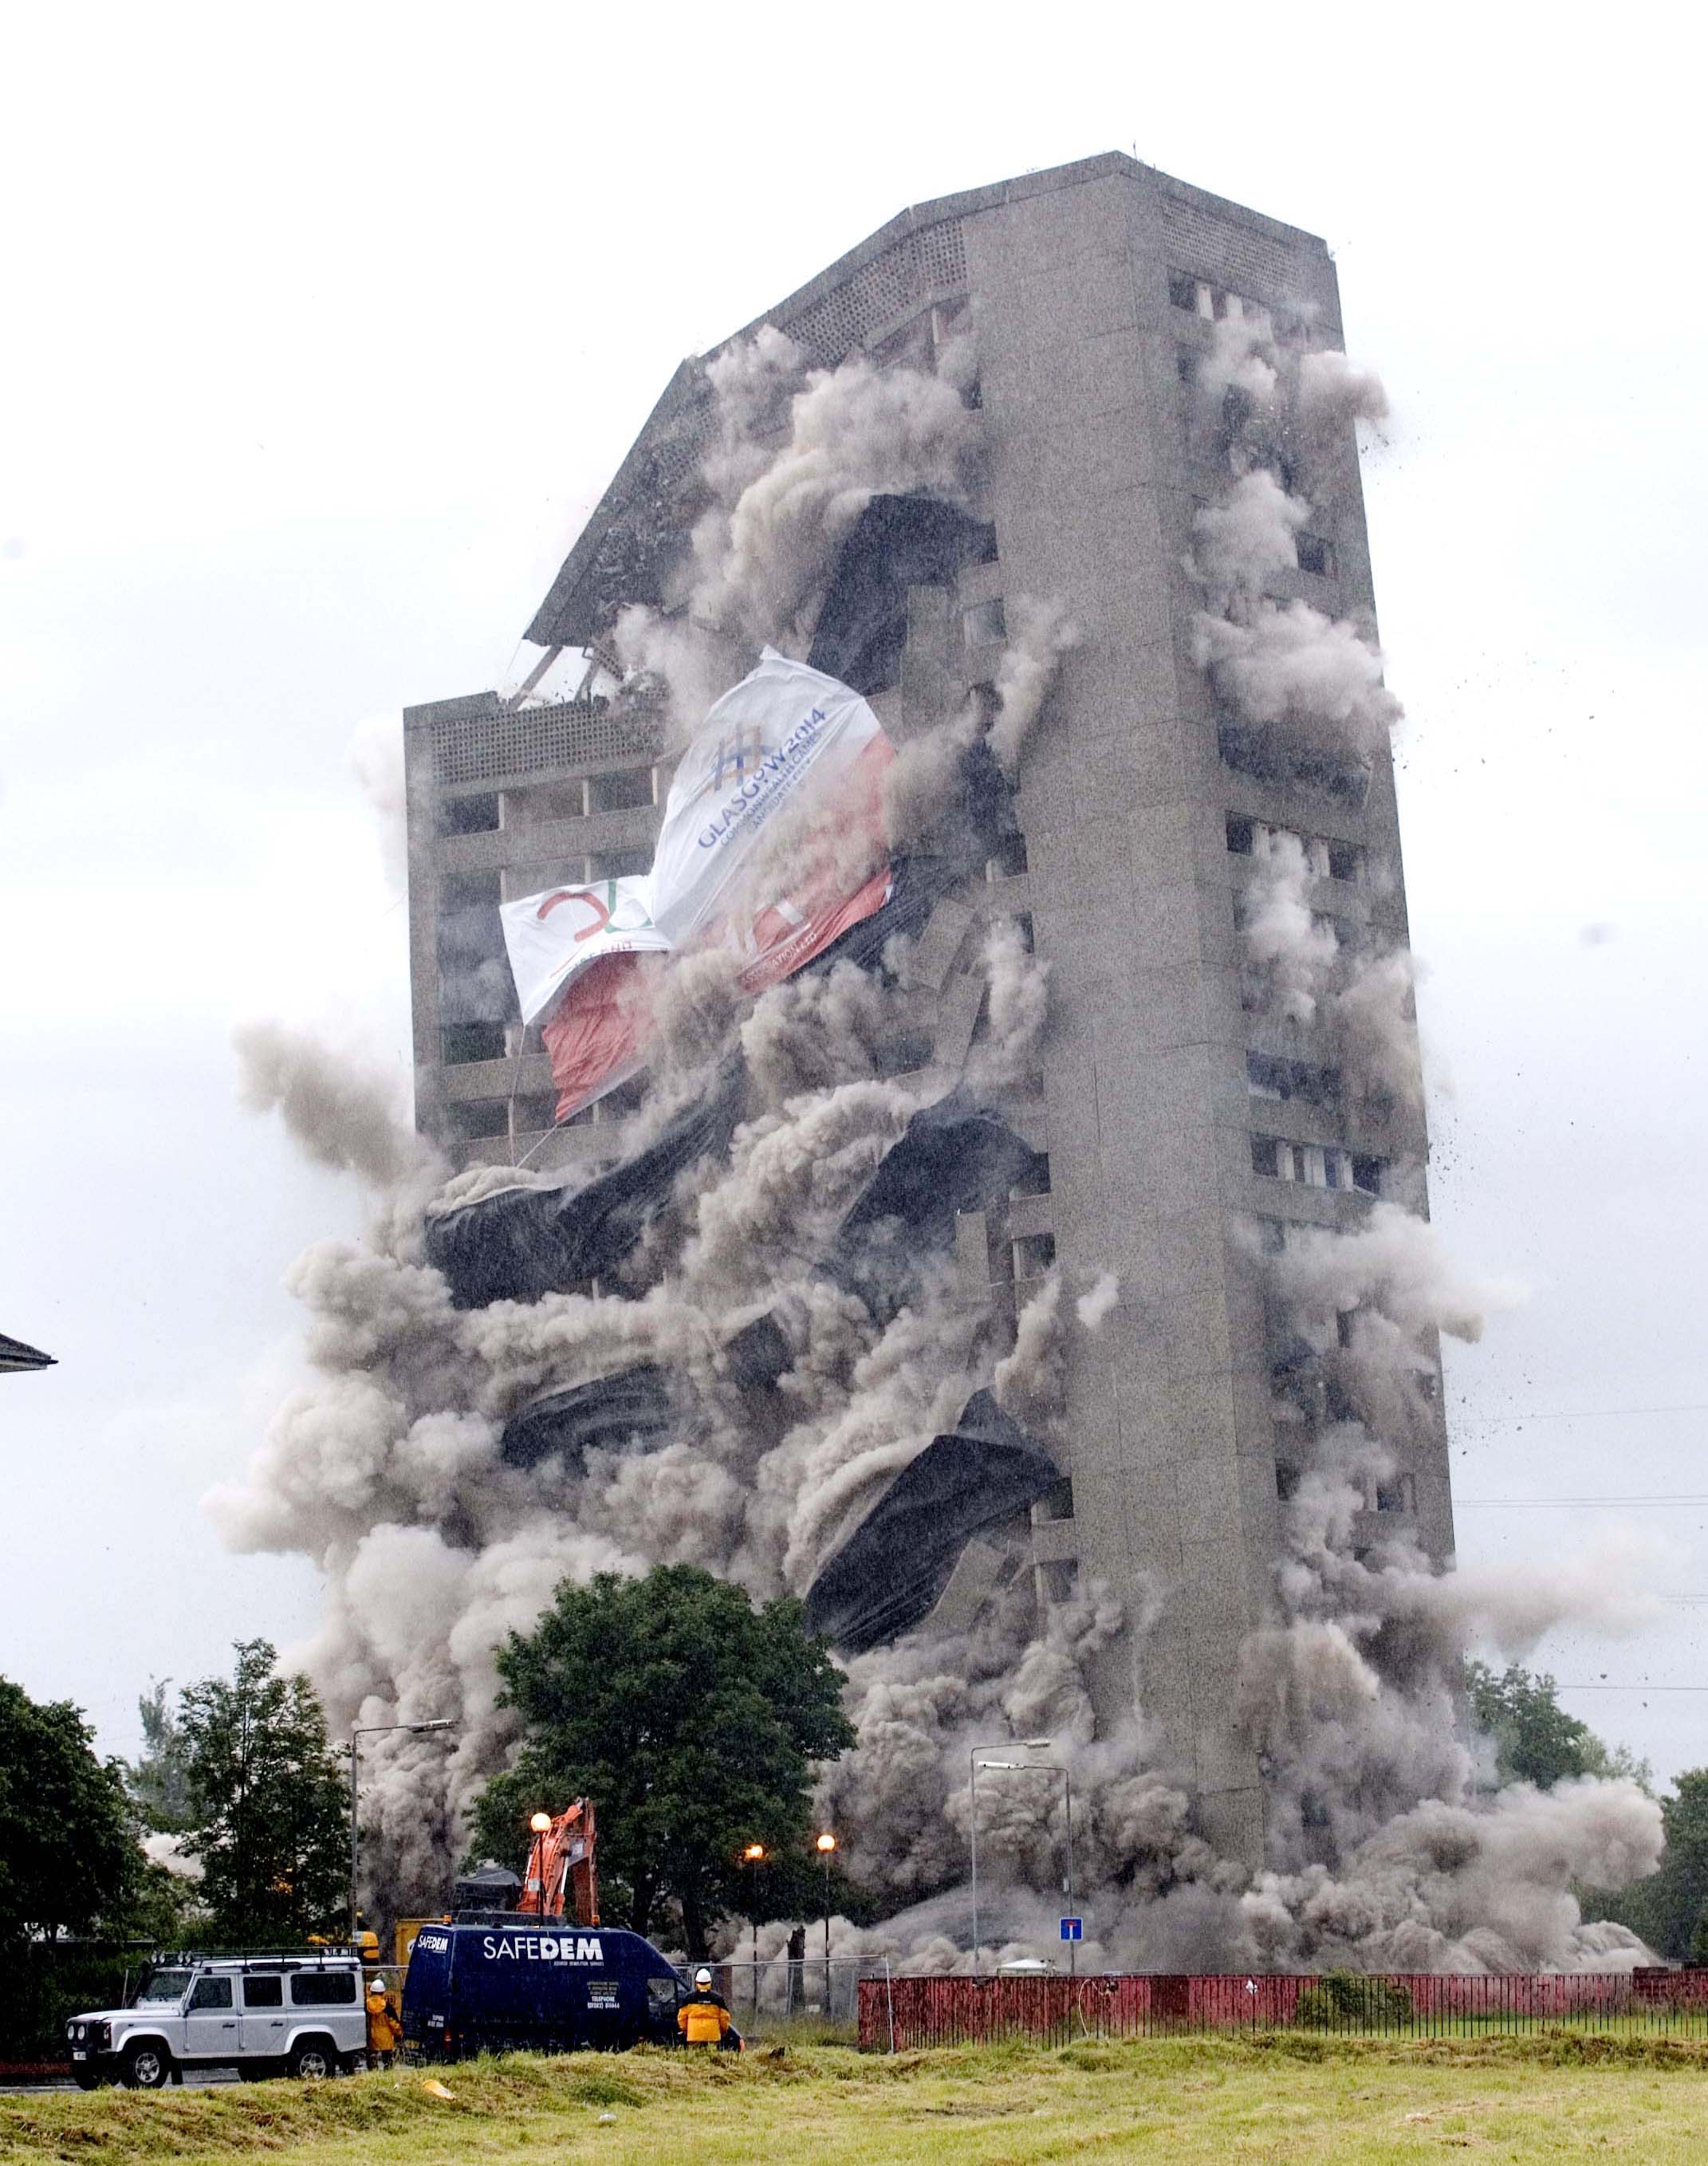 A block of flats is blown up to make way for the athletes' village.